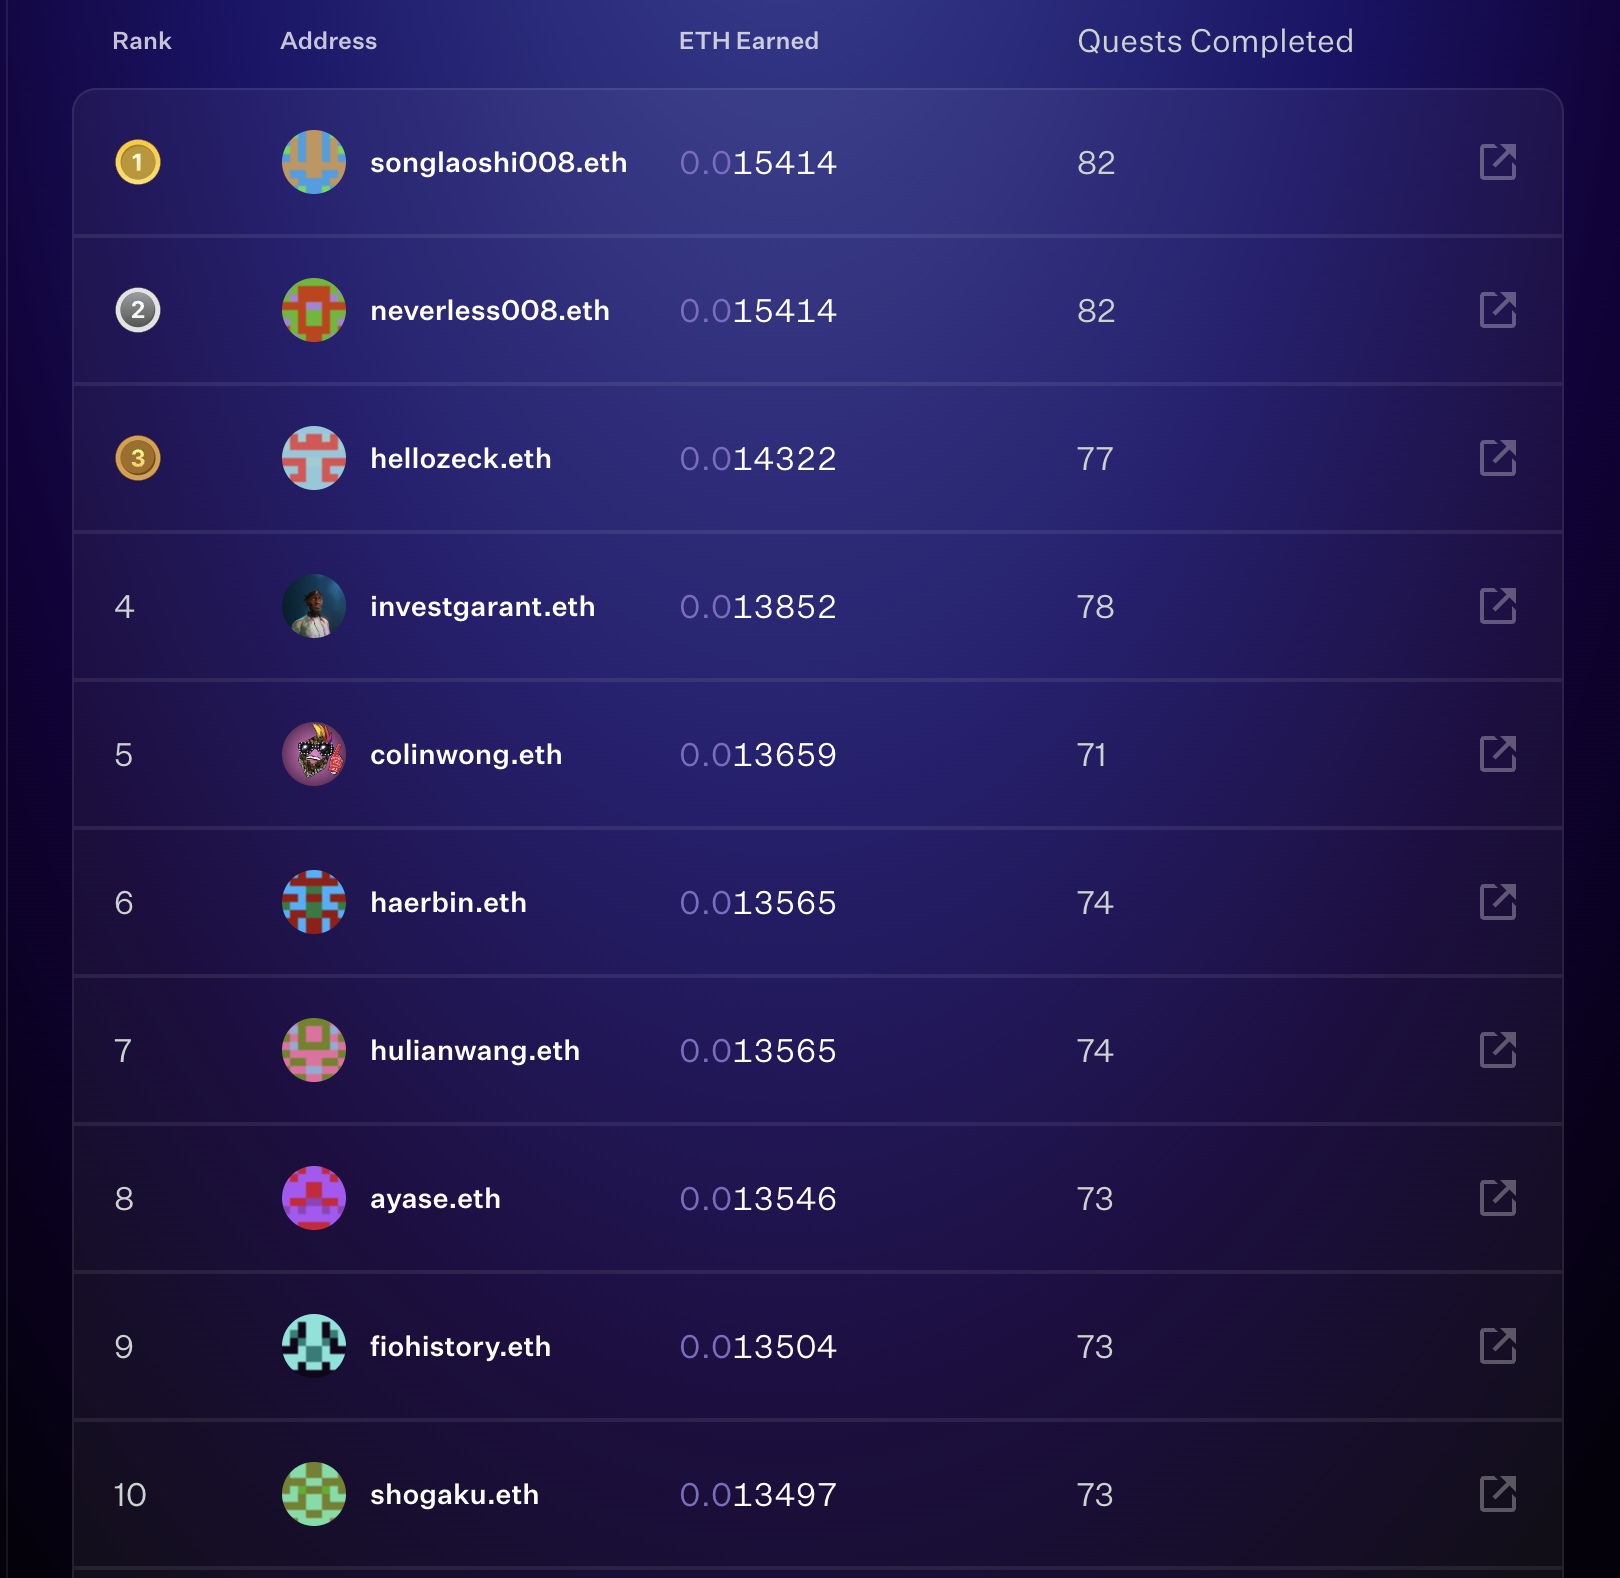 You can visit the leaderboard by signing into rabbithole.gg/leaderboard